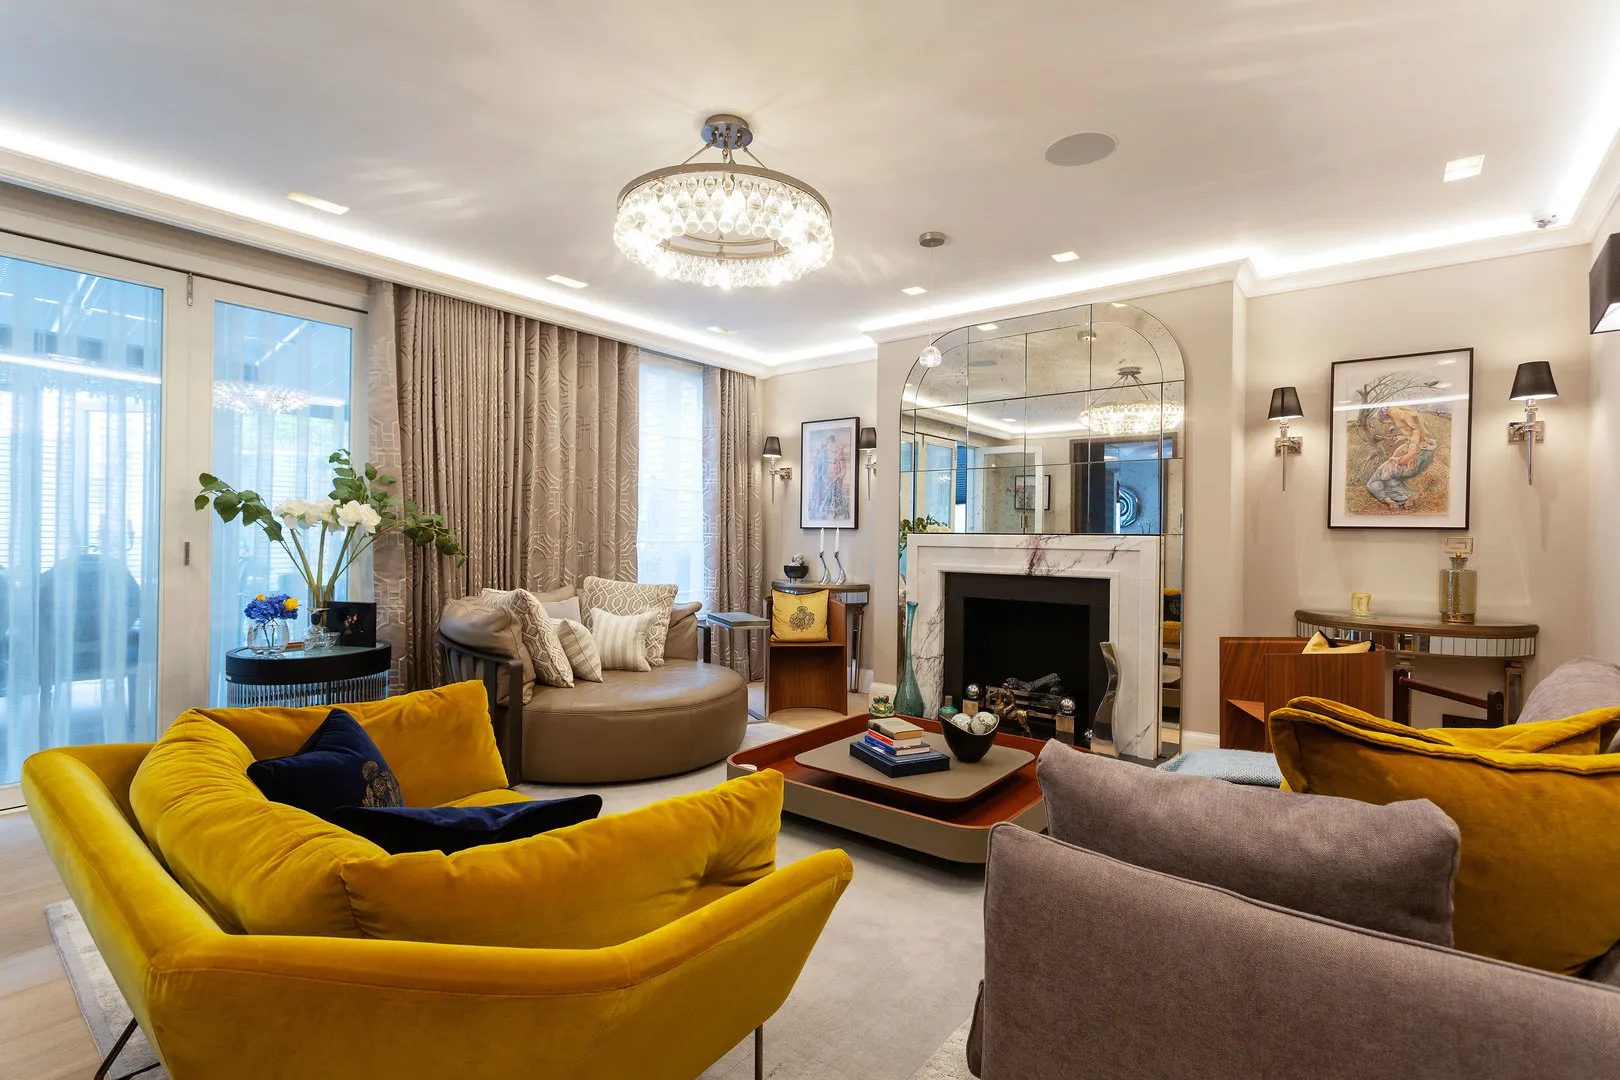 Drayton Gardens, holiday home in Chelsea, London